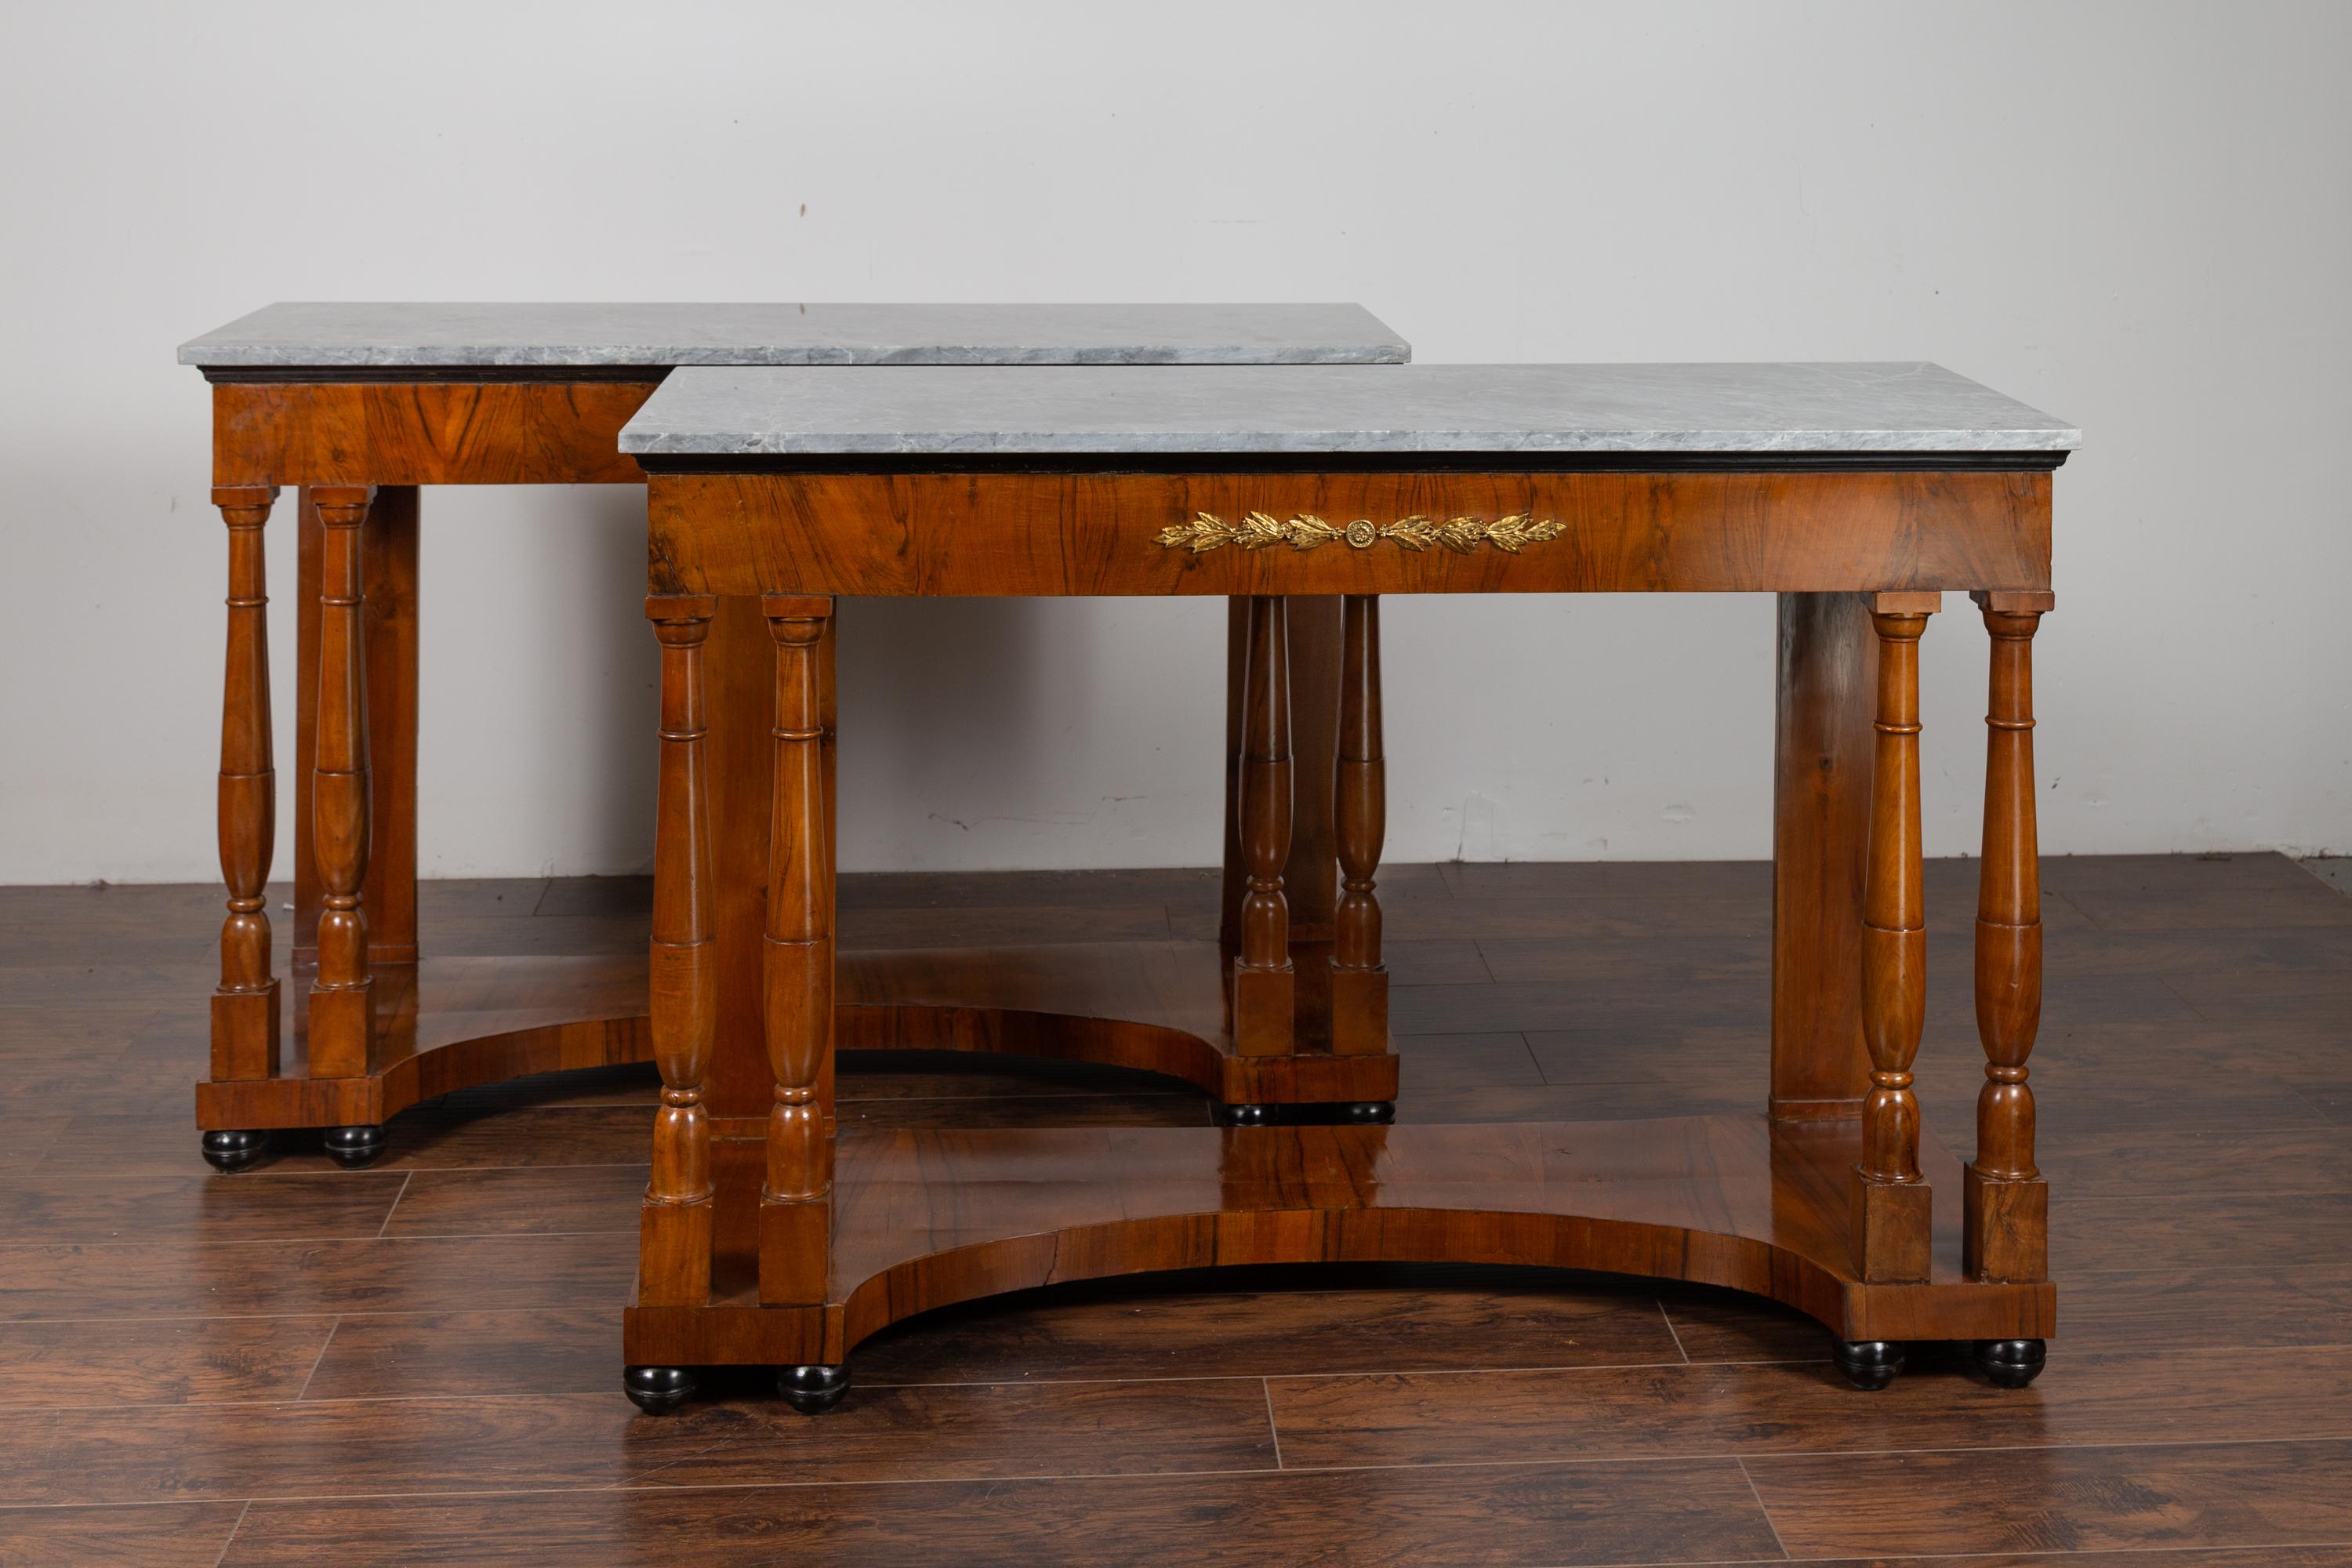 A pair of French Napoleon III period walnut console tables from the mid-19th century, with grey marble tops and bronze motifs. Born in France during the reign of Emperor Napoleon III, each of this pair of console tables features a lovely grey marble